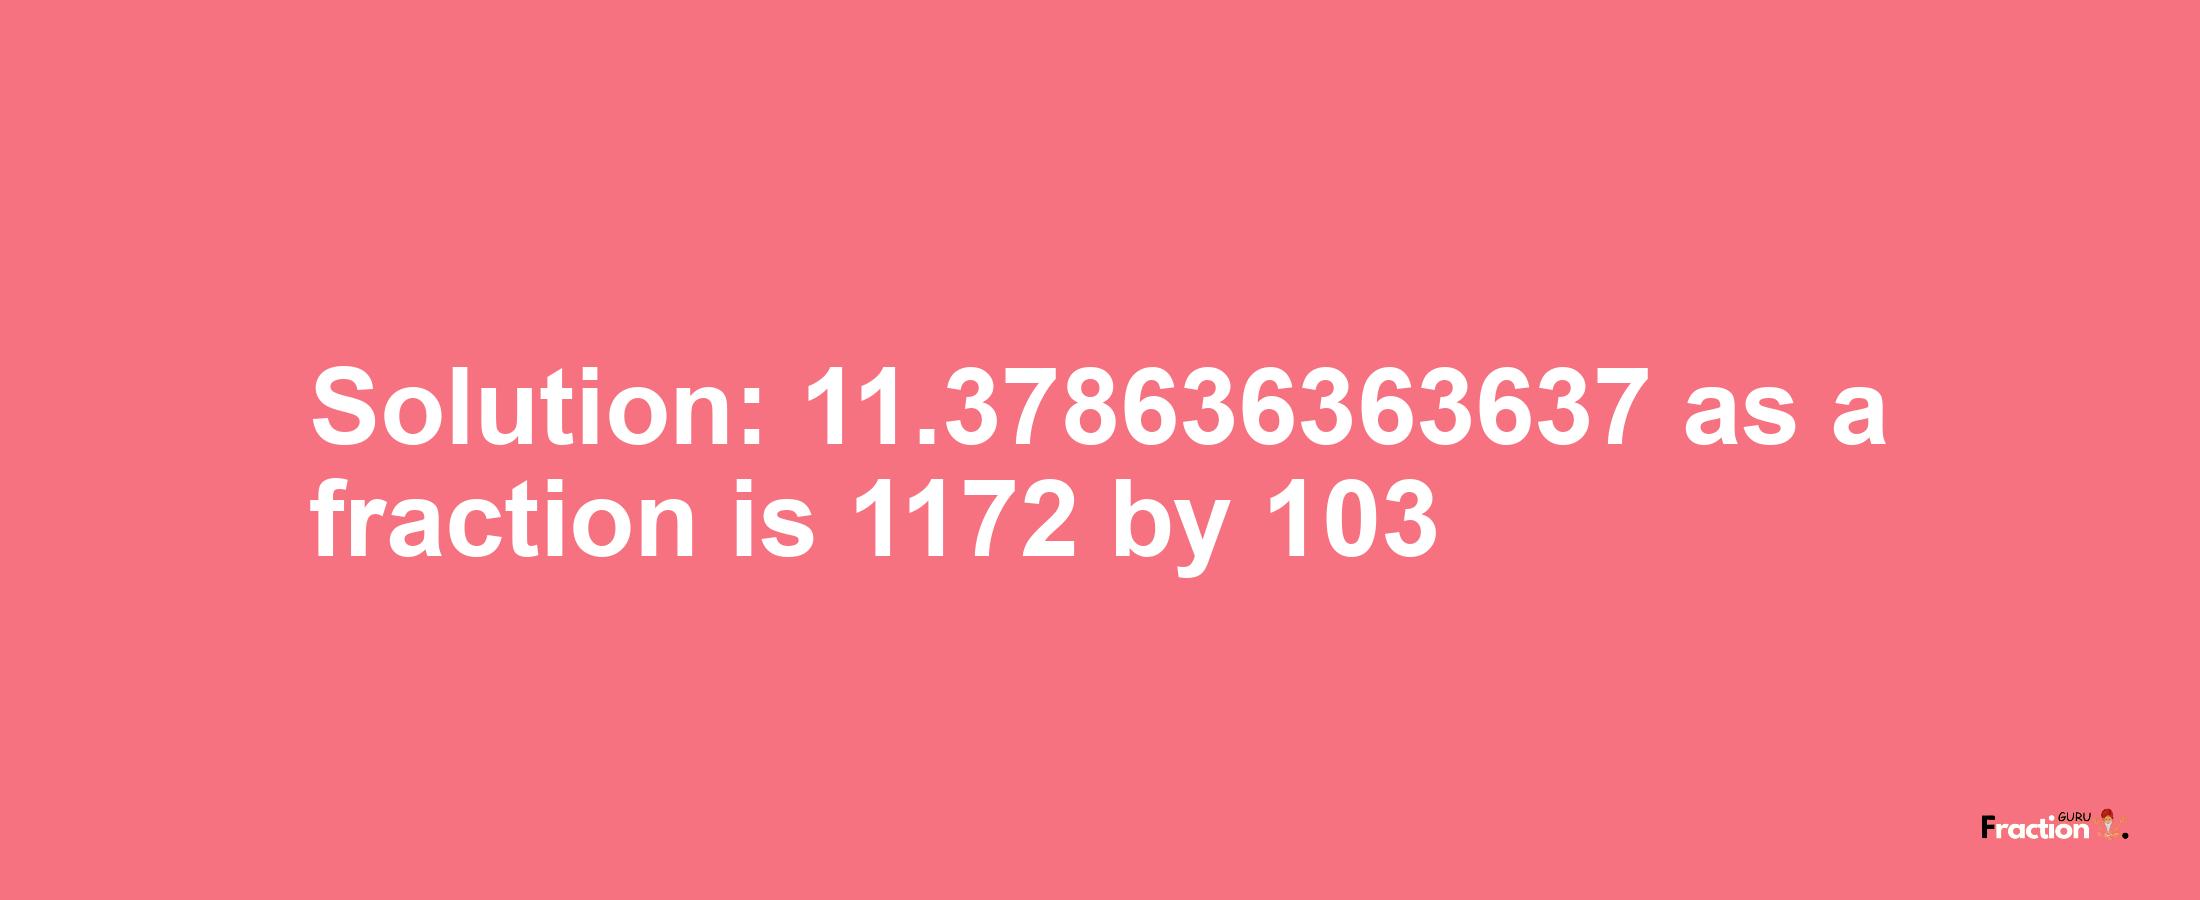 Solution:11.378636363637 as a fraction is 1172/103